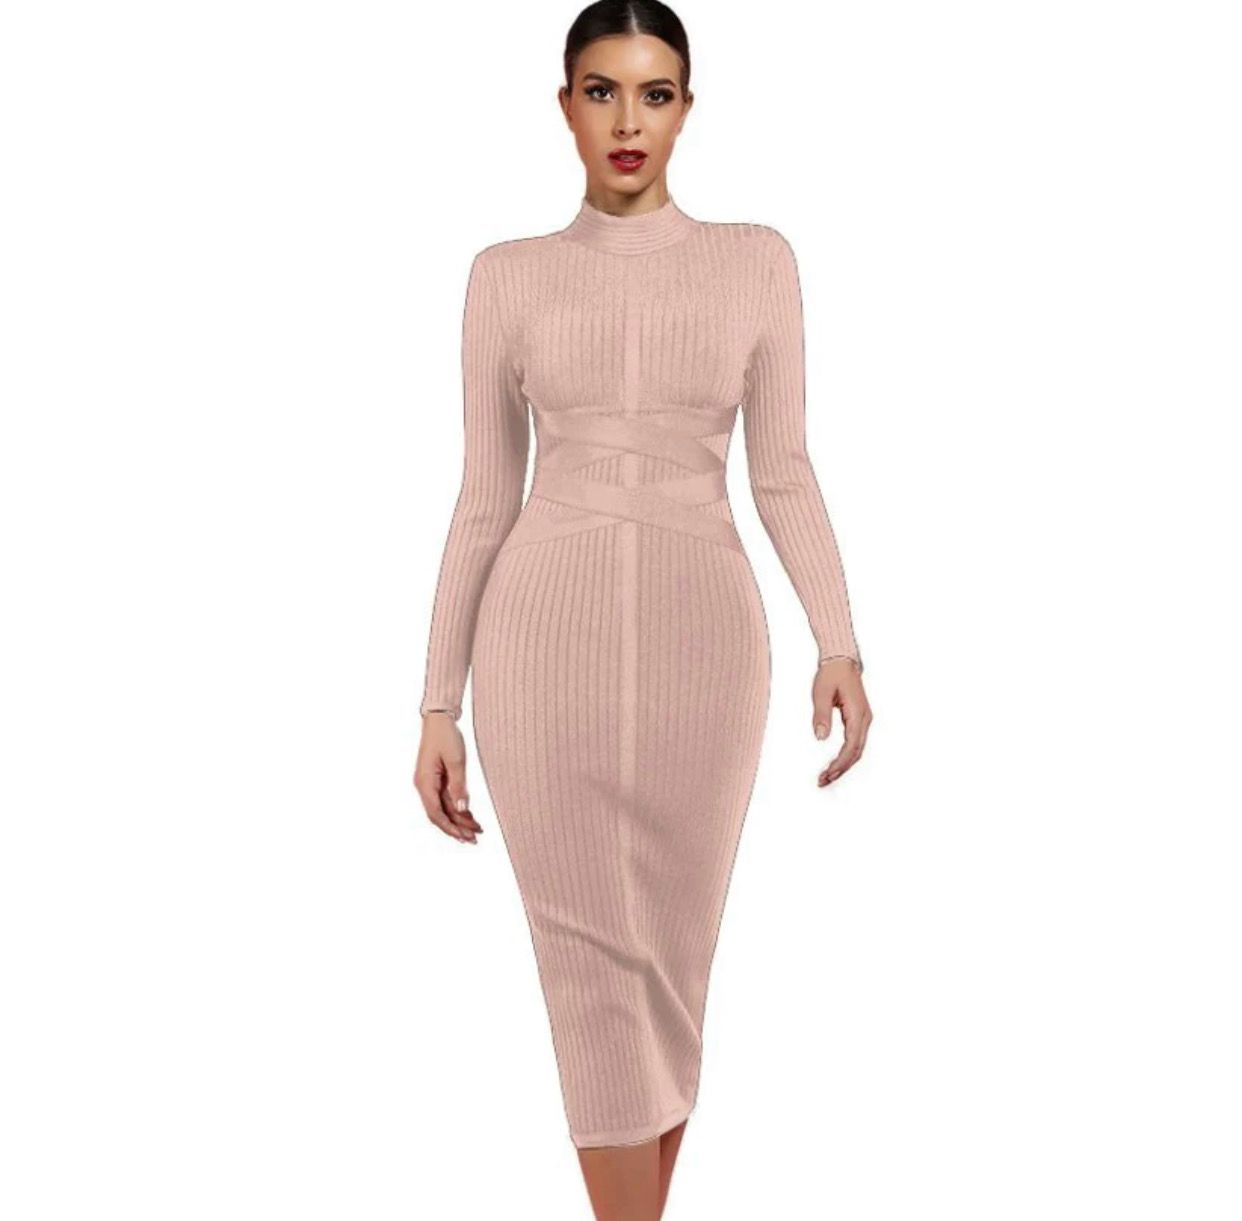 NEXT DAY DELIVERY BELISA Round Neck Long Sleeve Knee Lenght Ribbed Lace Up Bandage Dress